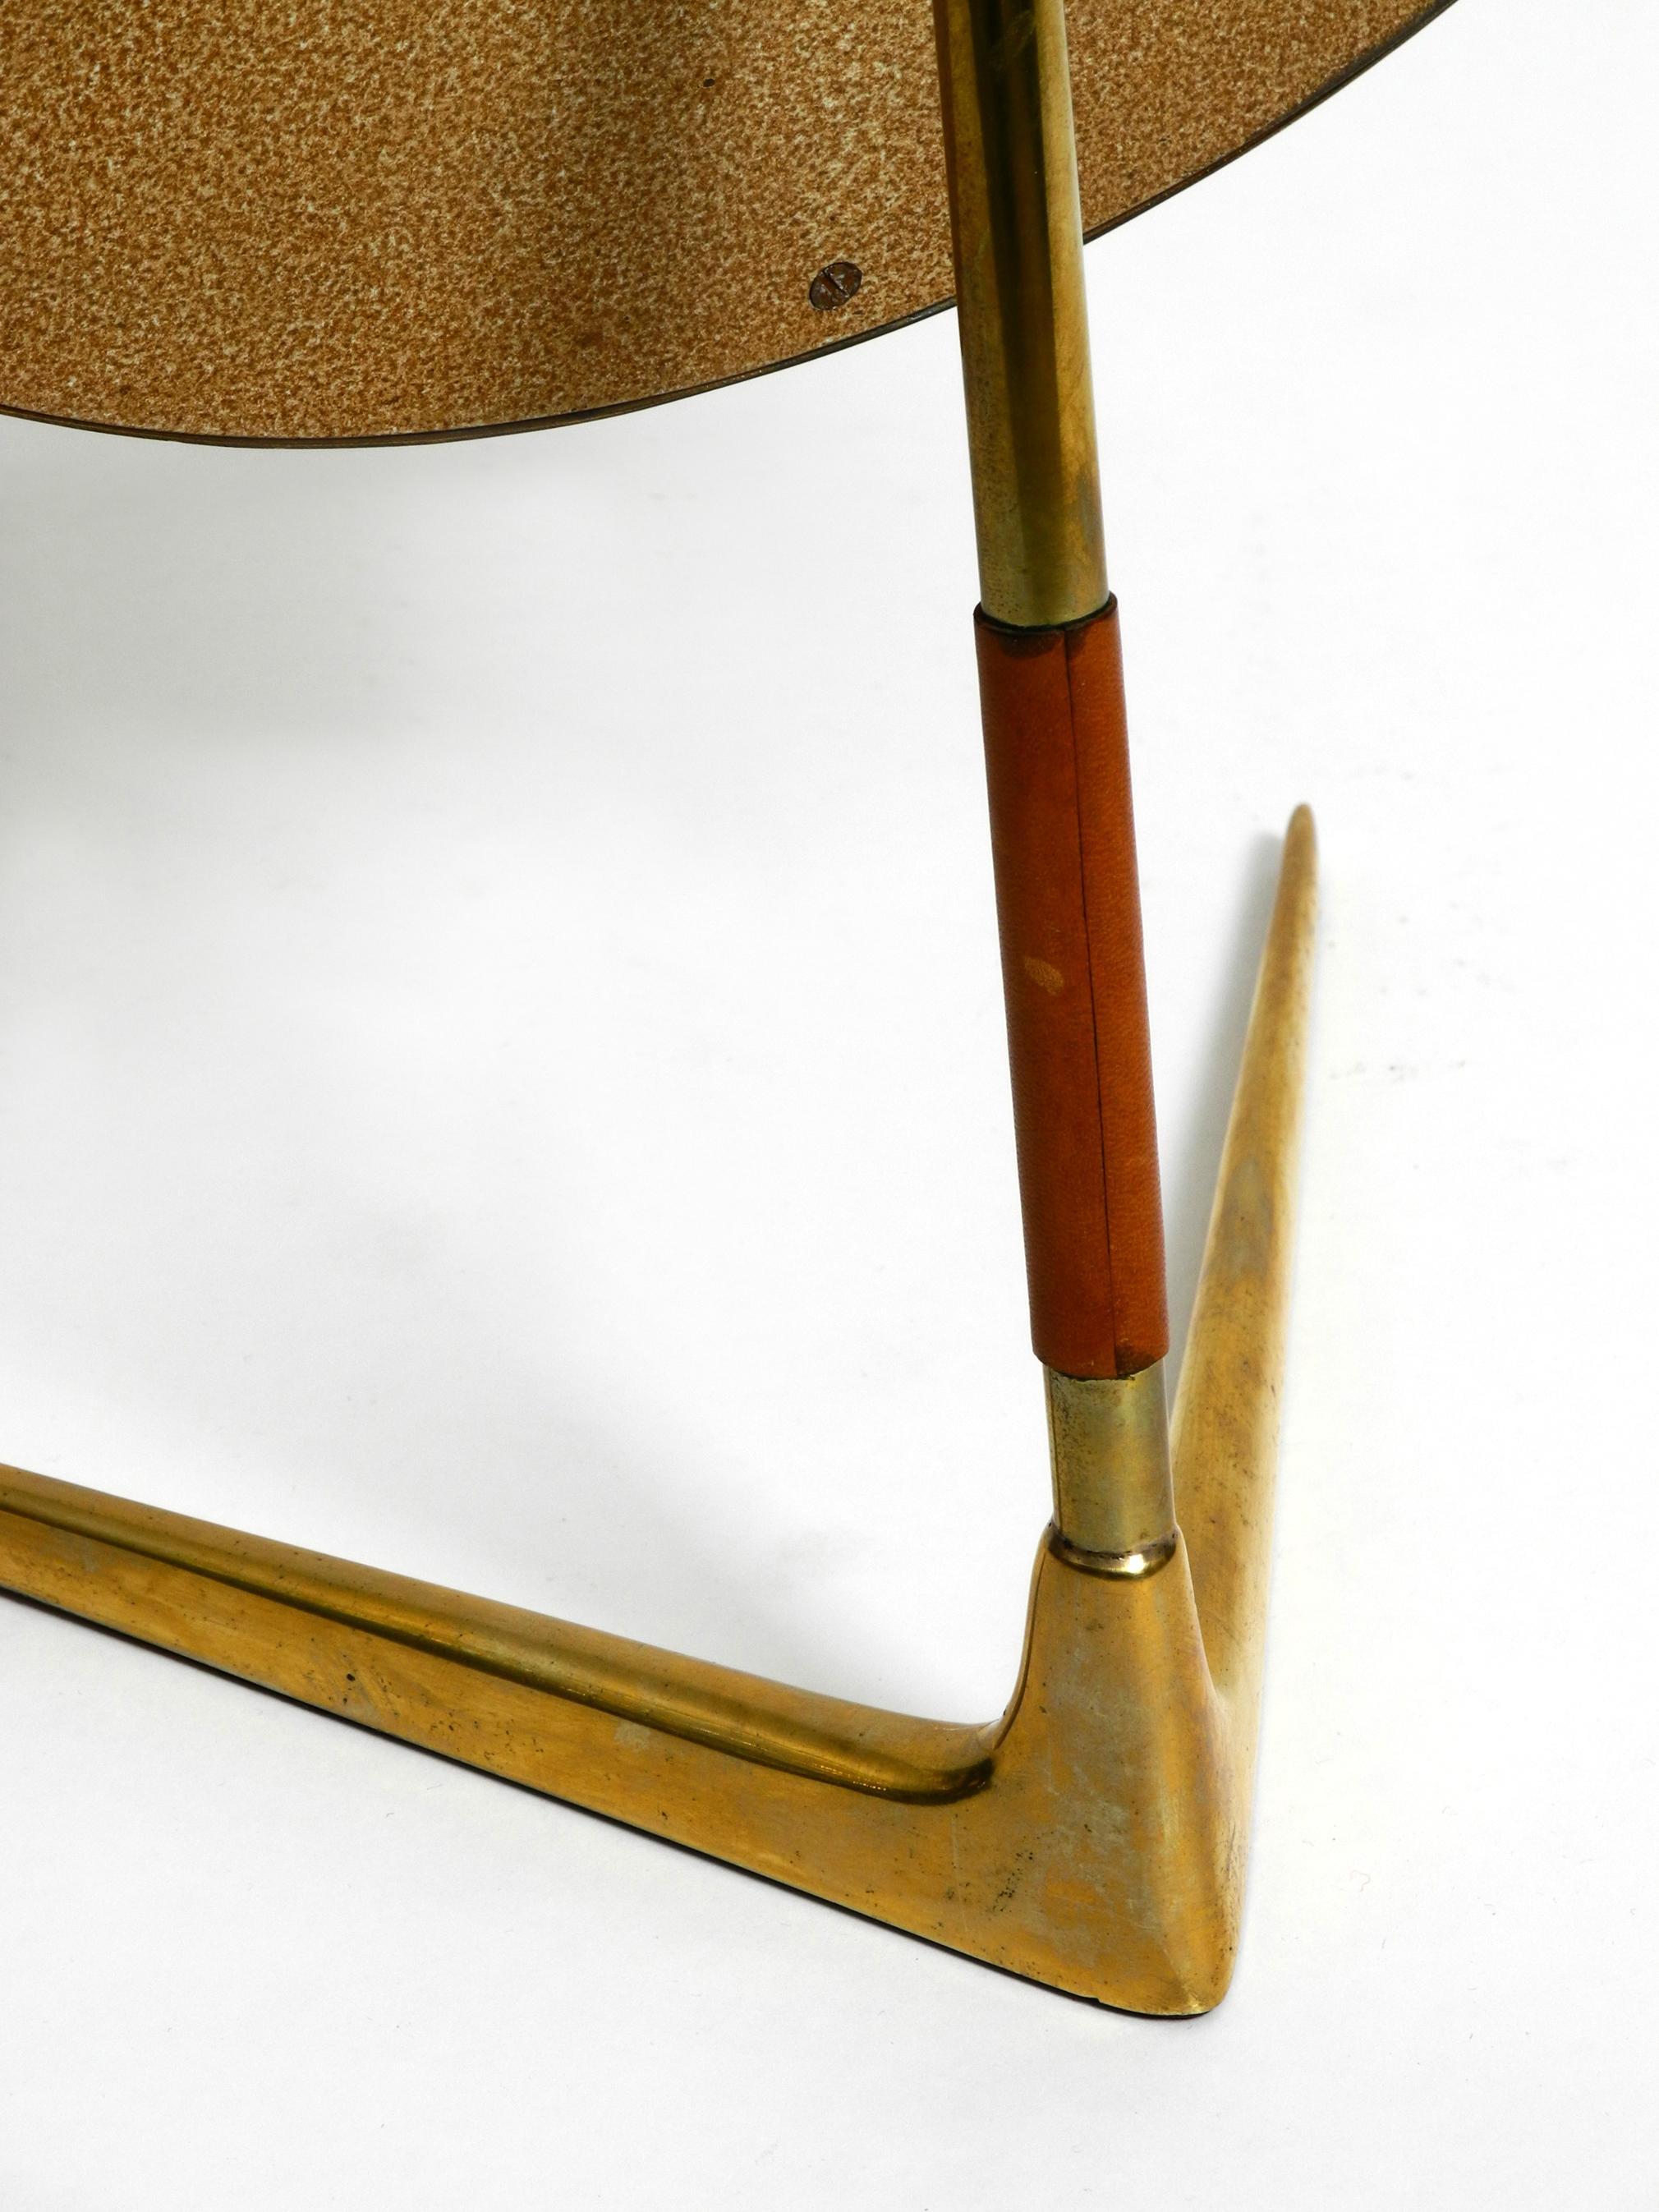 Large Italian Midcentury Crow's Foot Table Mirror Made of Brass and Leather 5